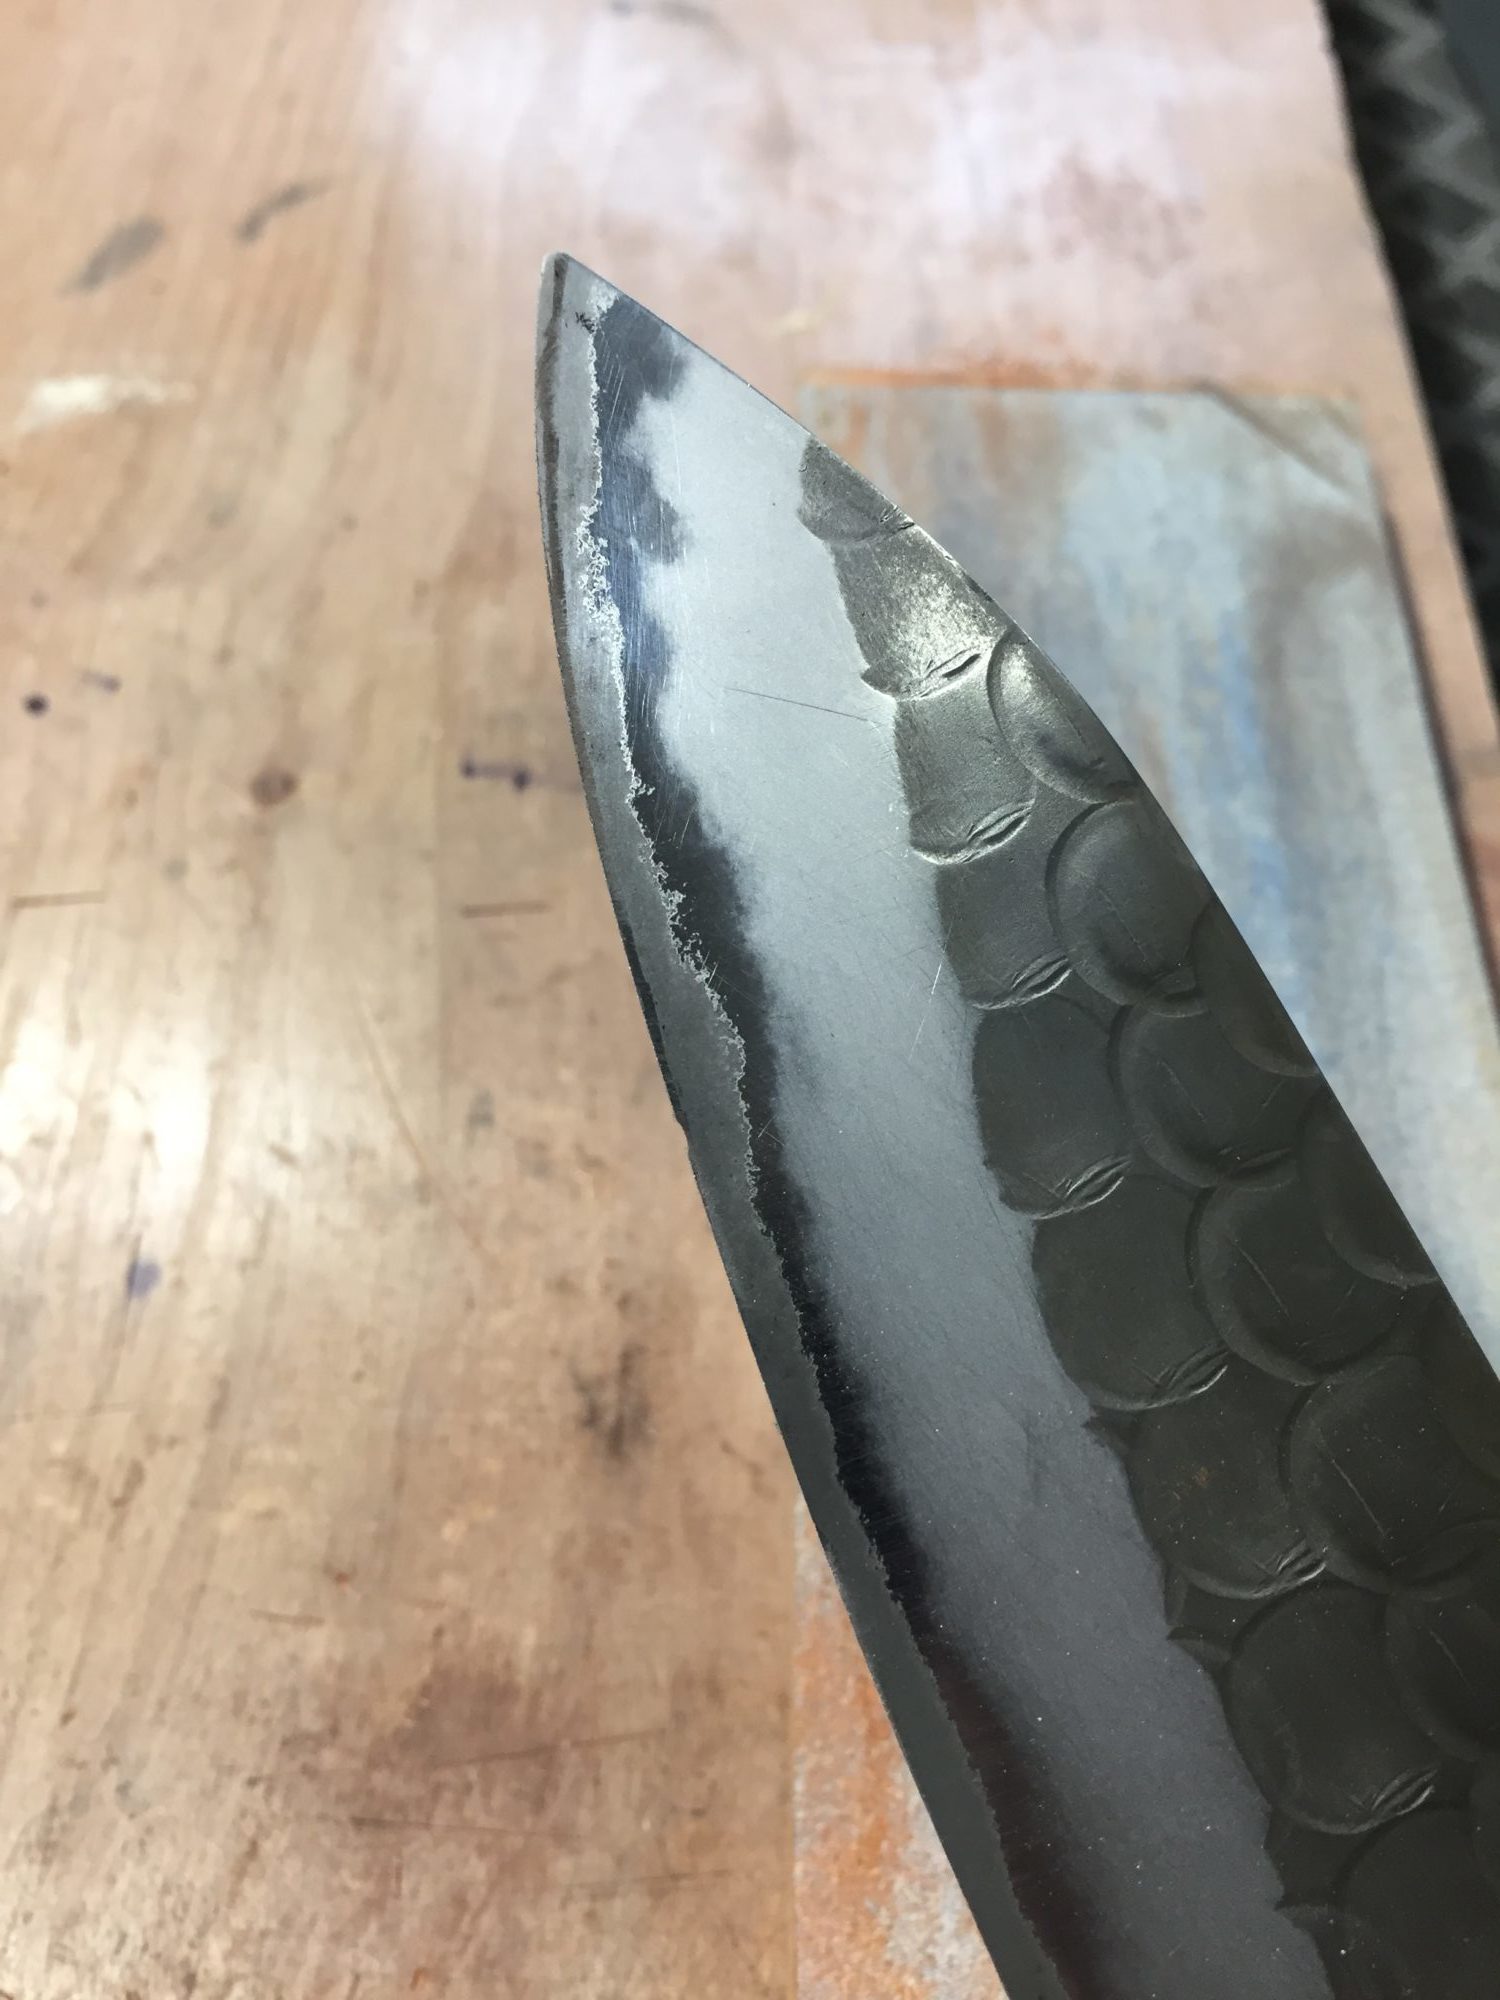 grinding out a chip in chef knife